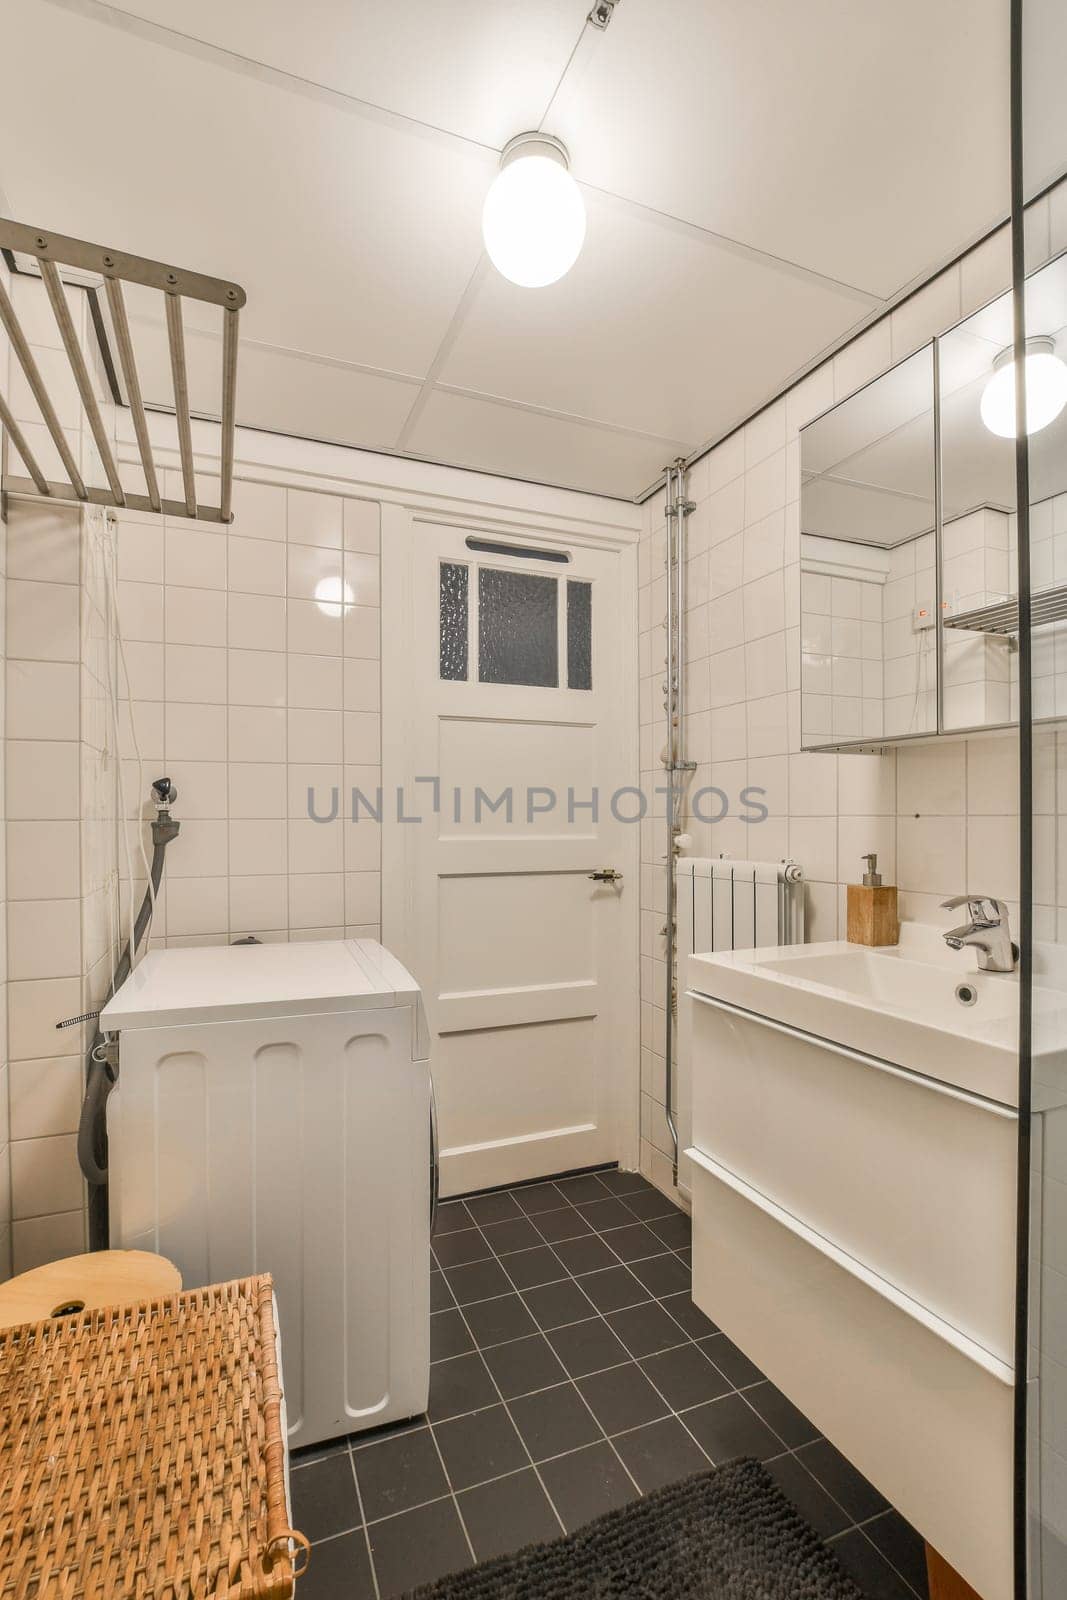 a bathroom with black tile and white tiles on the floor, along with a washer and dryer in the corner